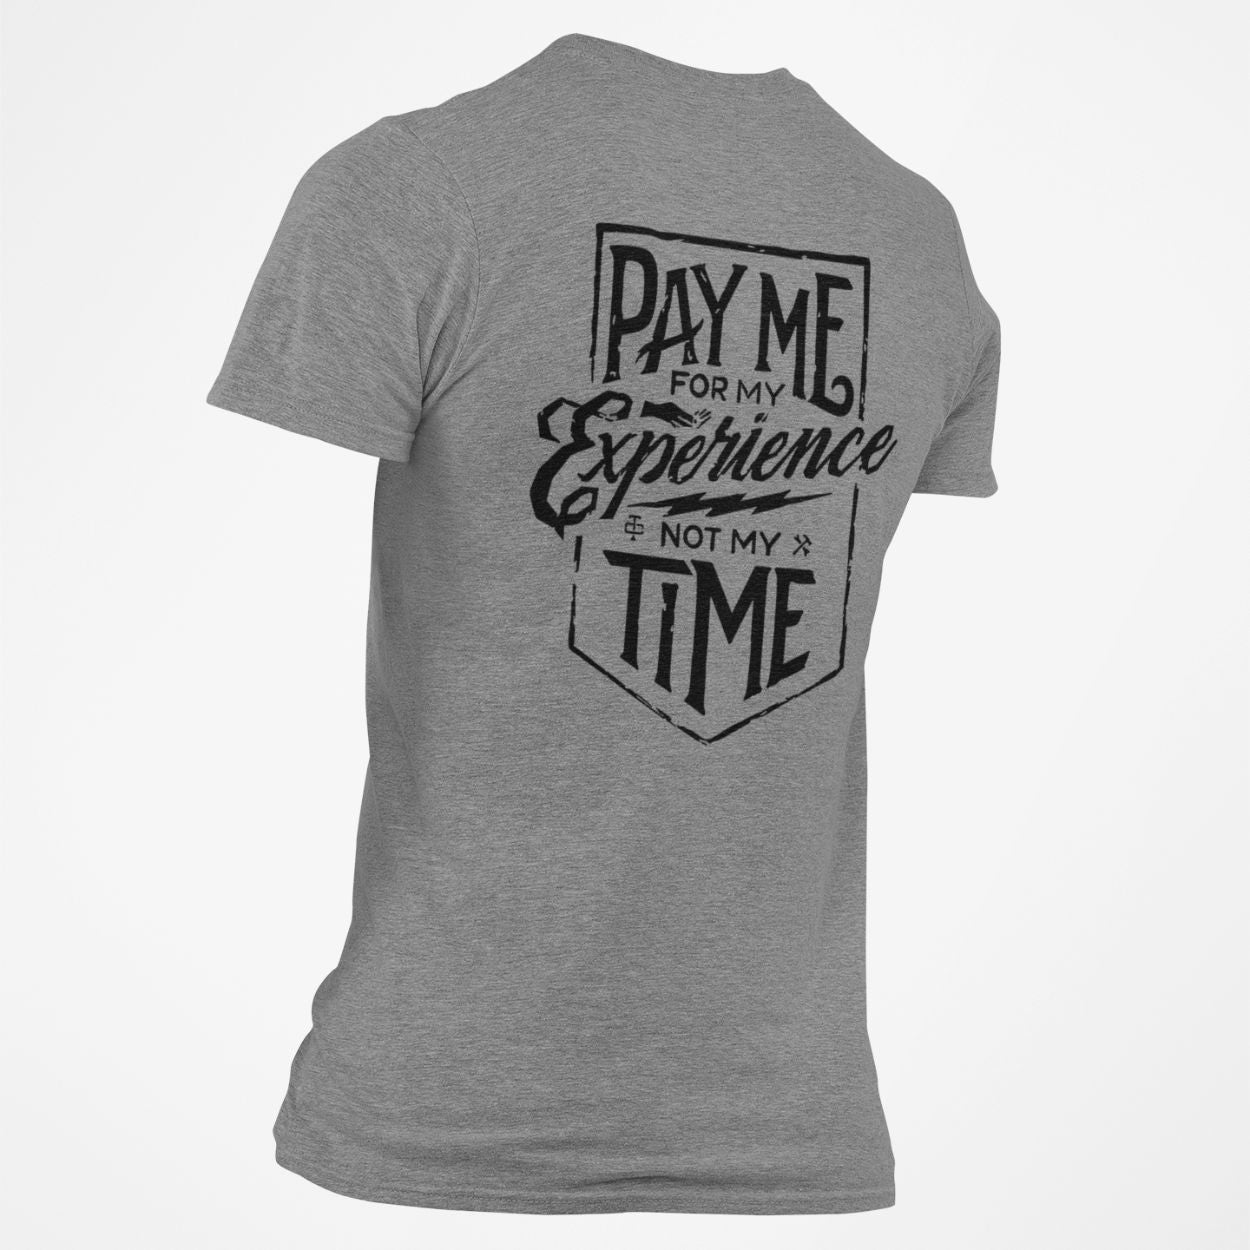 Pay Me for My Experience Not my Time T-Shirt Blue Collar Tee